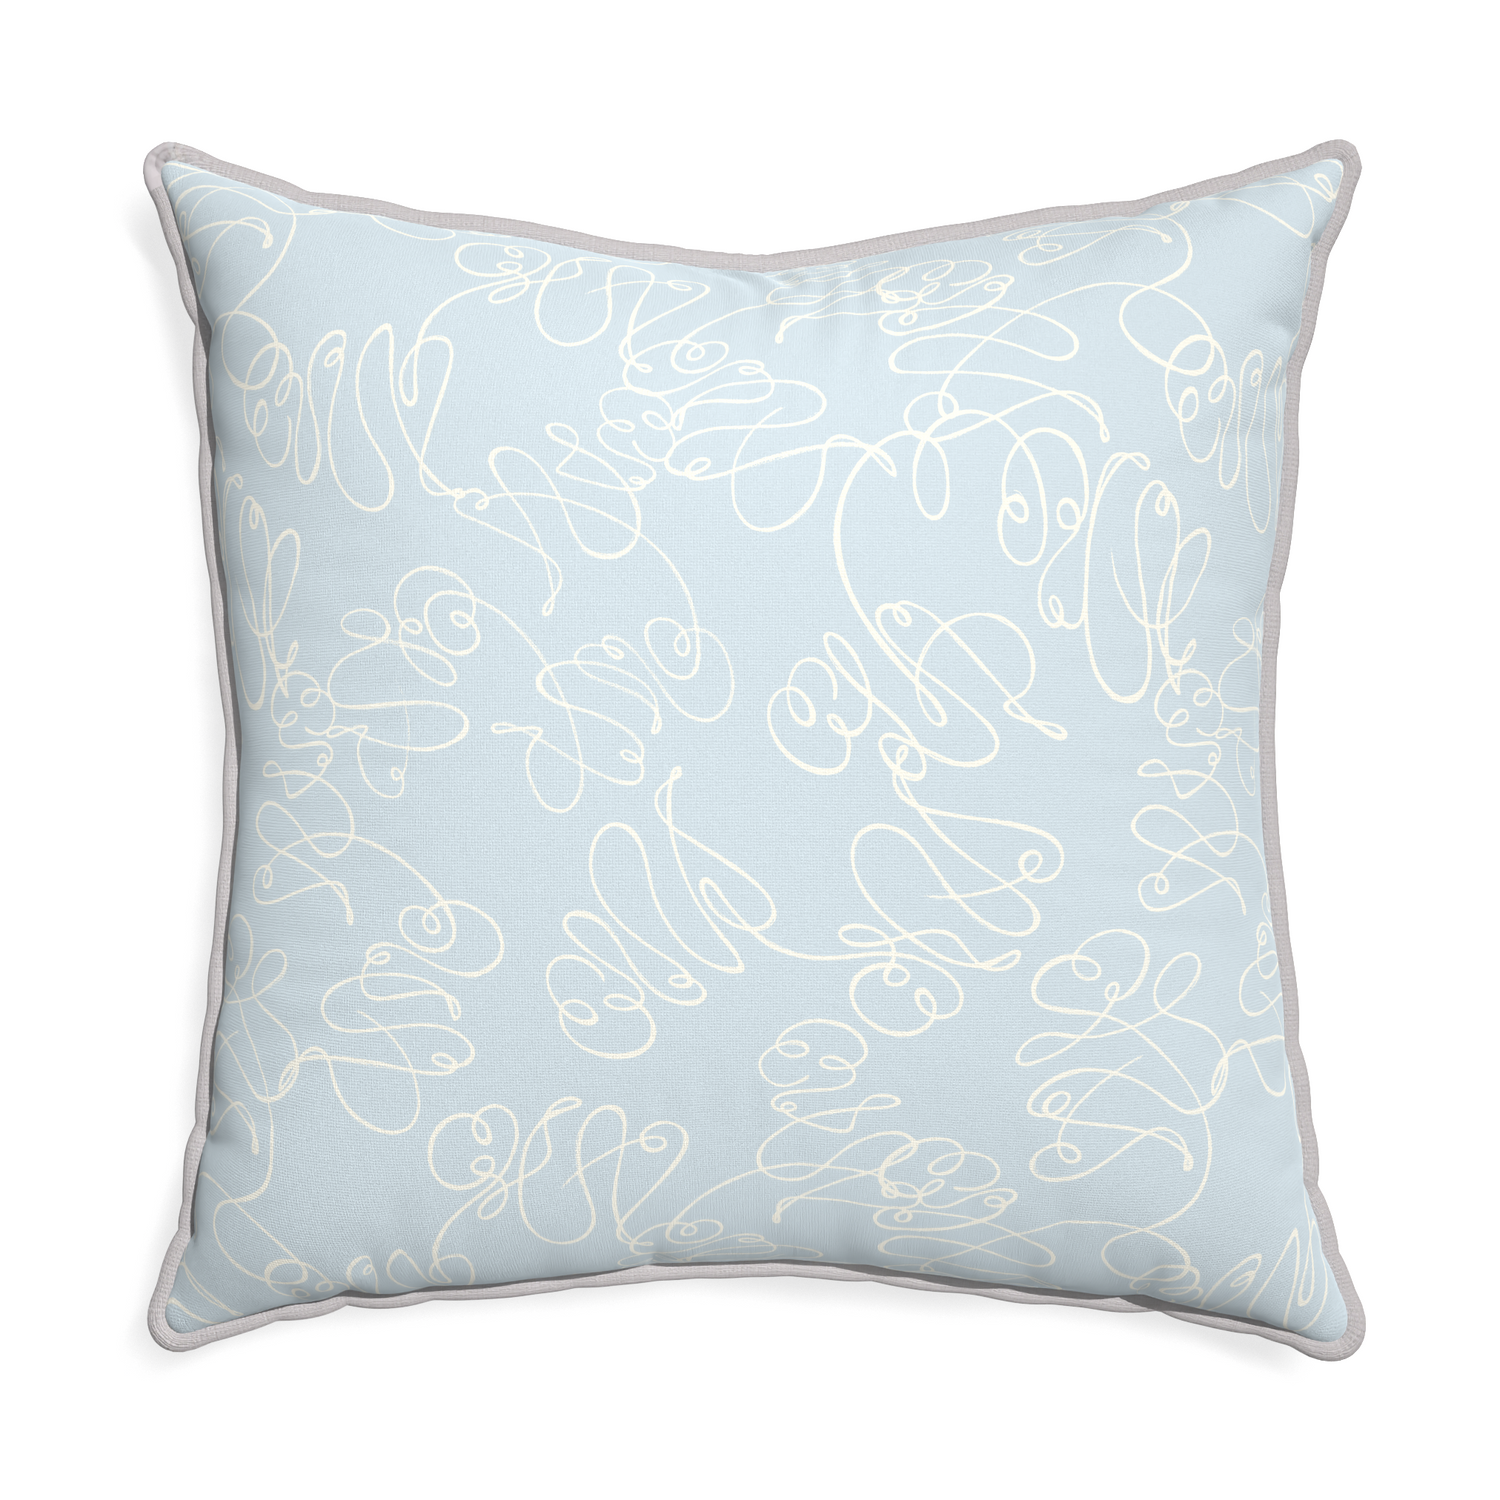 Euro-sham mirabella custom powder blue abstractpillow with pebble piping on white background